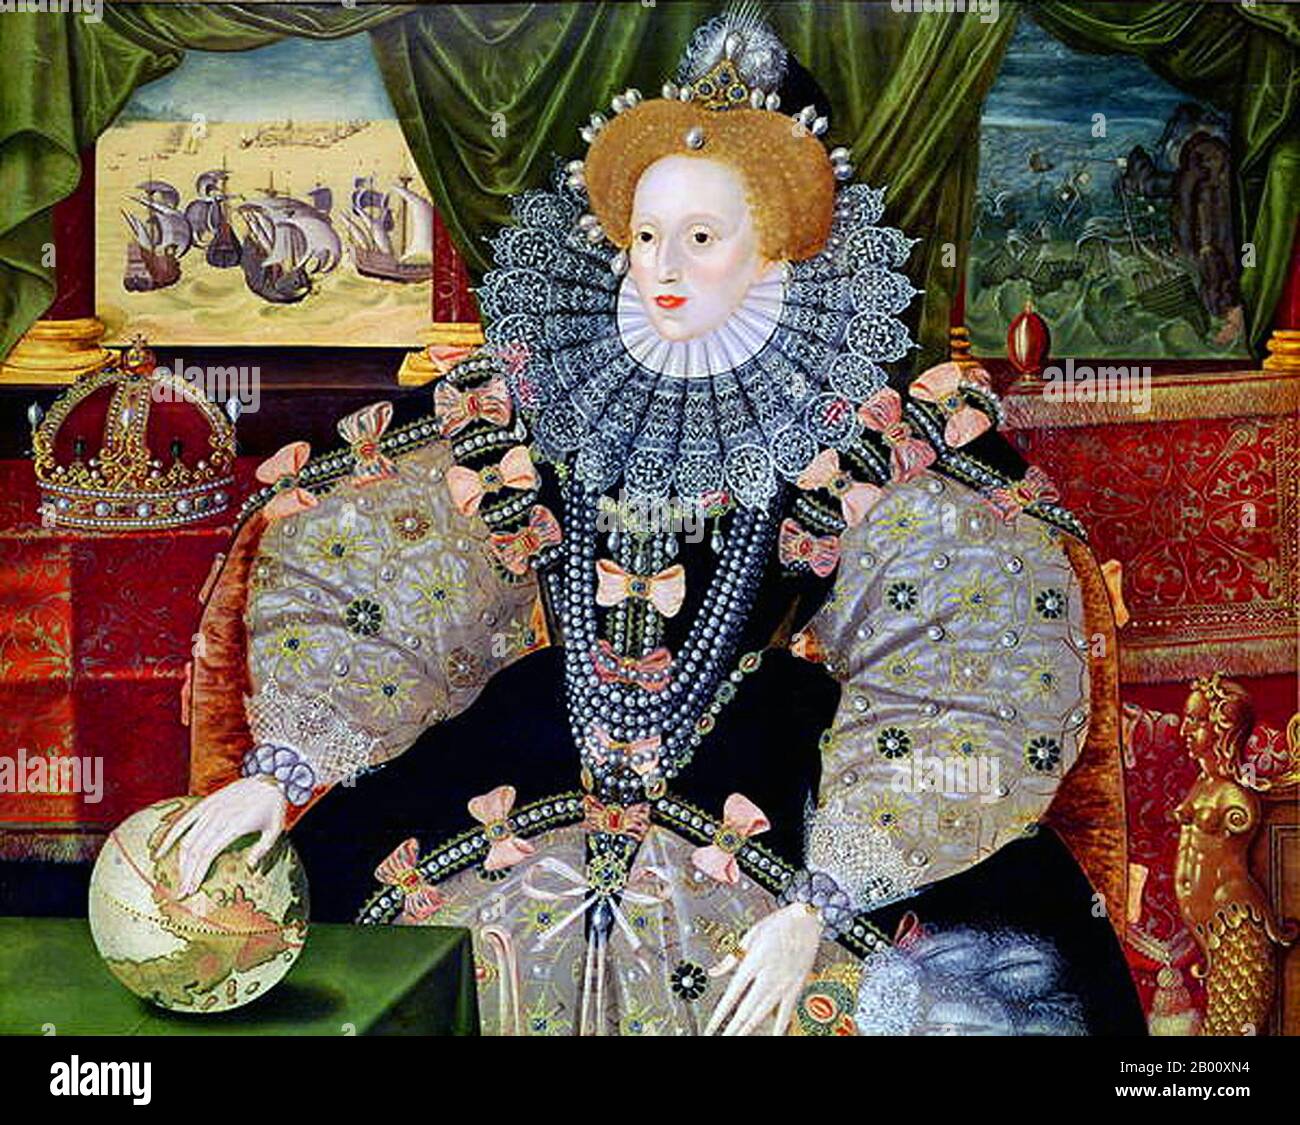 England: 'Portrait of Elizabeth I of England, the Armada Portrait'. Oil on panel painting formerly attributed to George Gower (1540-1596), c. 1588.  Elizabeth I (7 September 1533 – 24 March 1603) was Queen regnant of England and Queen regnant of Ireland from 17 November 1558 until her death. Sometimes called The Virgin Queen, Gloriana, or Good Queen Bess, Elizabeth was the fifth and last monarch of the Tudor dynasty. Elizabeth I's foreign policy with regard to Asia, Africa and Latin America demonstrated a new understanding of the role of England as a maritime, Protestant power globally. Stock Photo